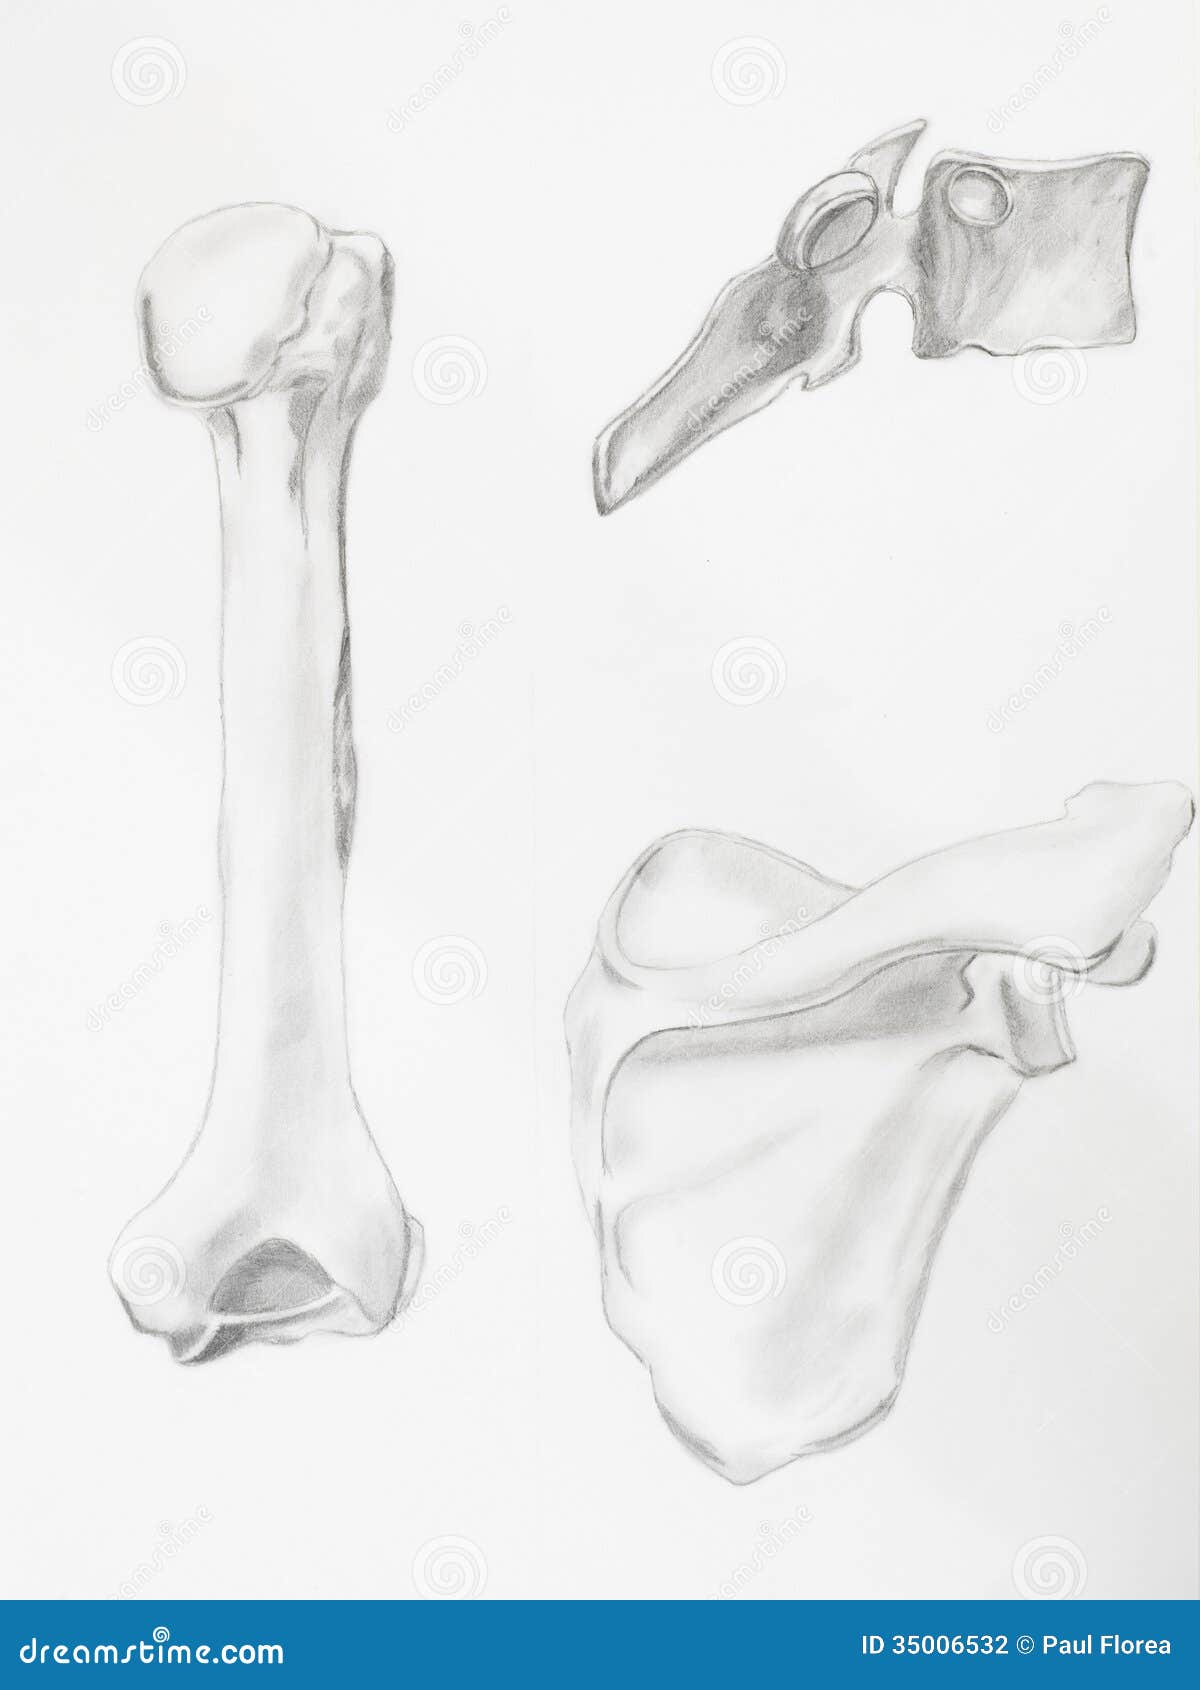 10 Best Bone drawing ideas  sketches art sketches drawings